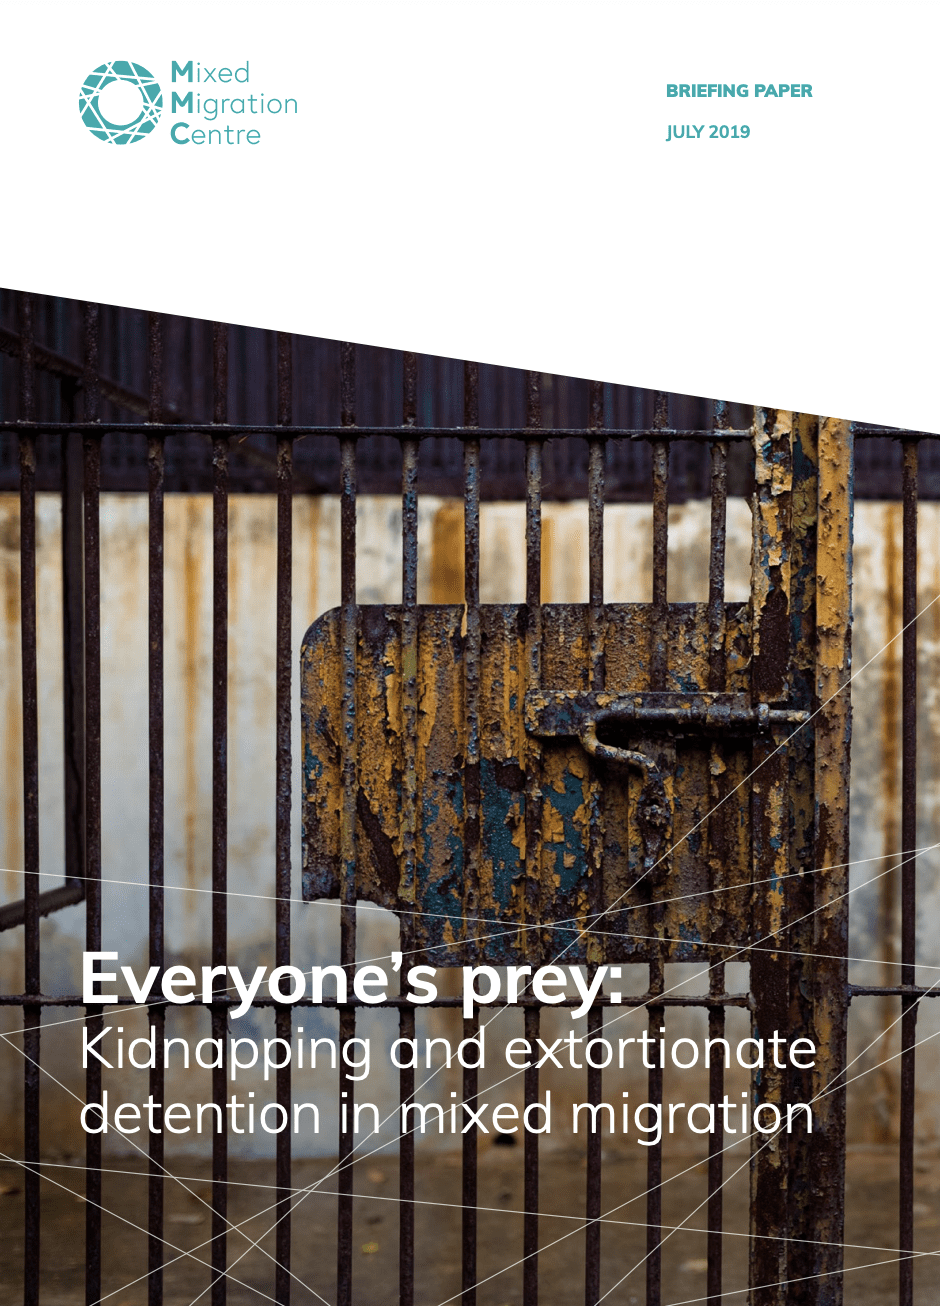 Everyone’s prey: Kidnapping and extortionate detention in mixed migration